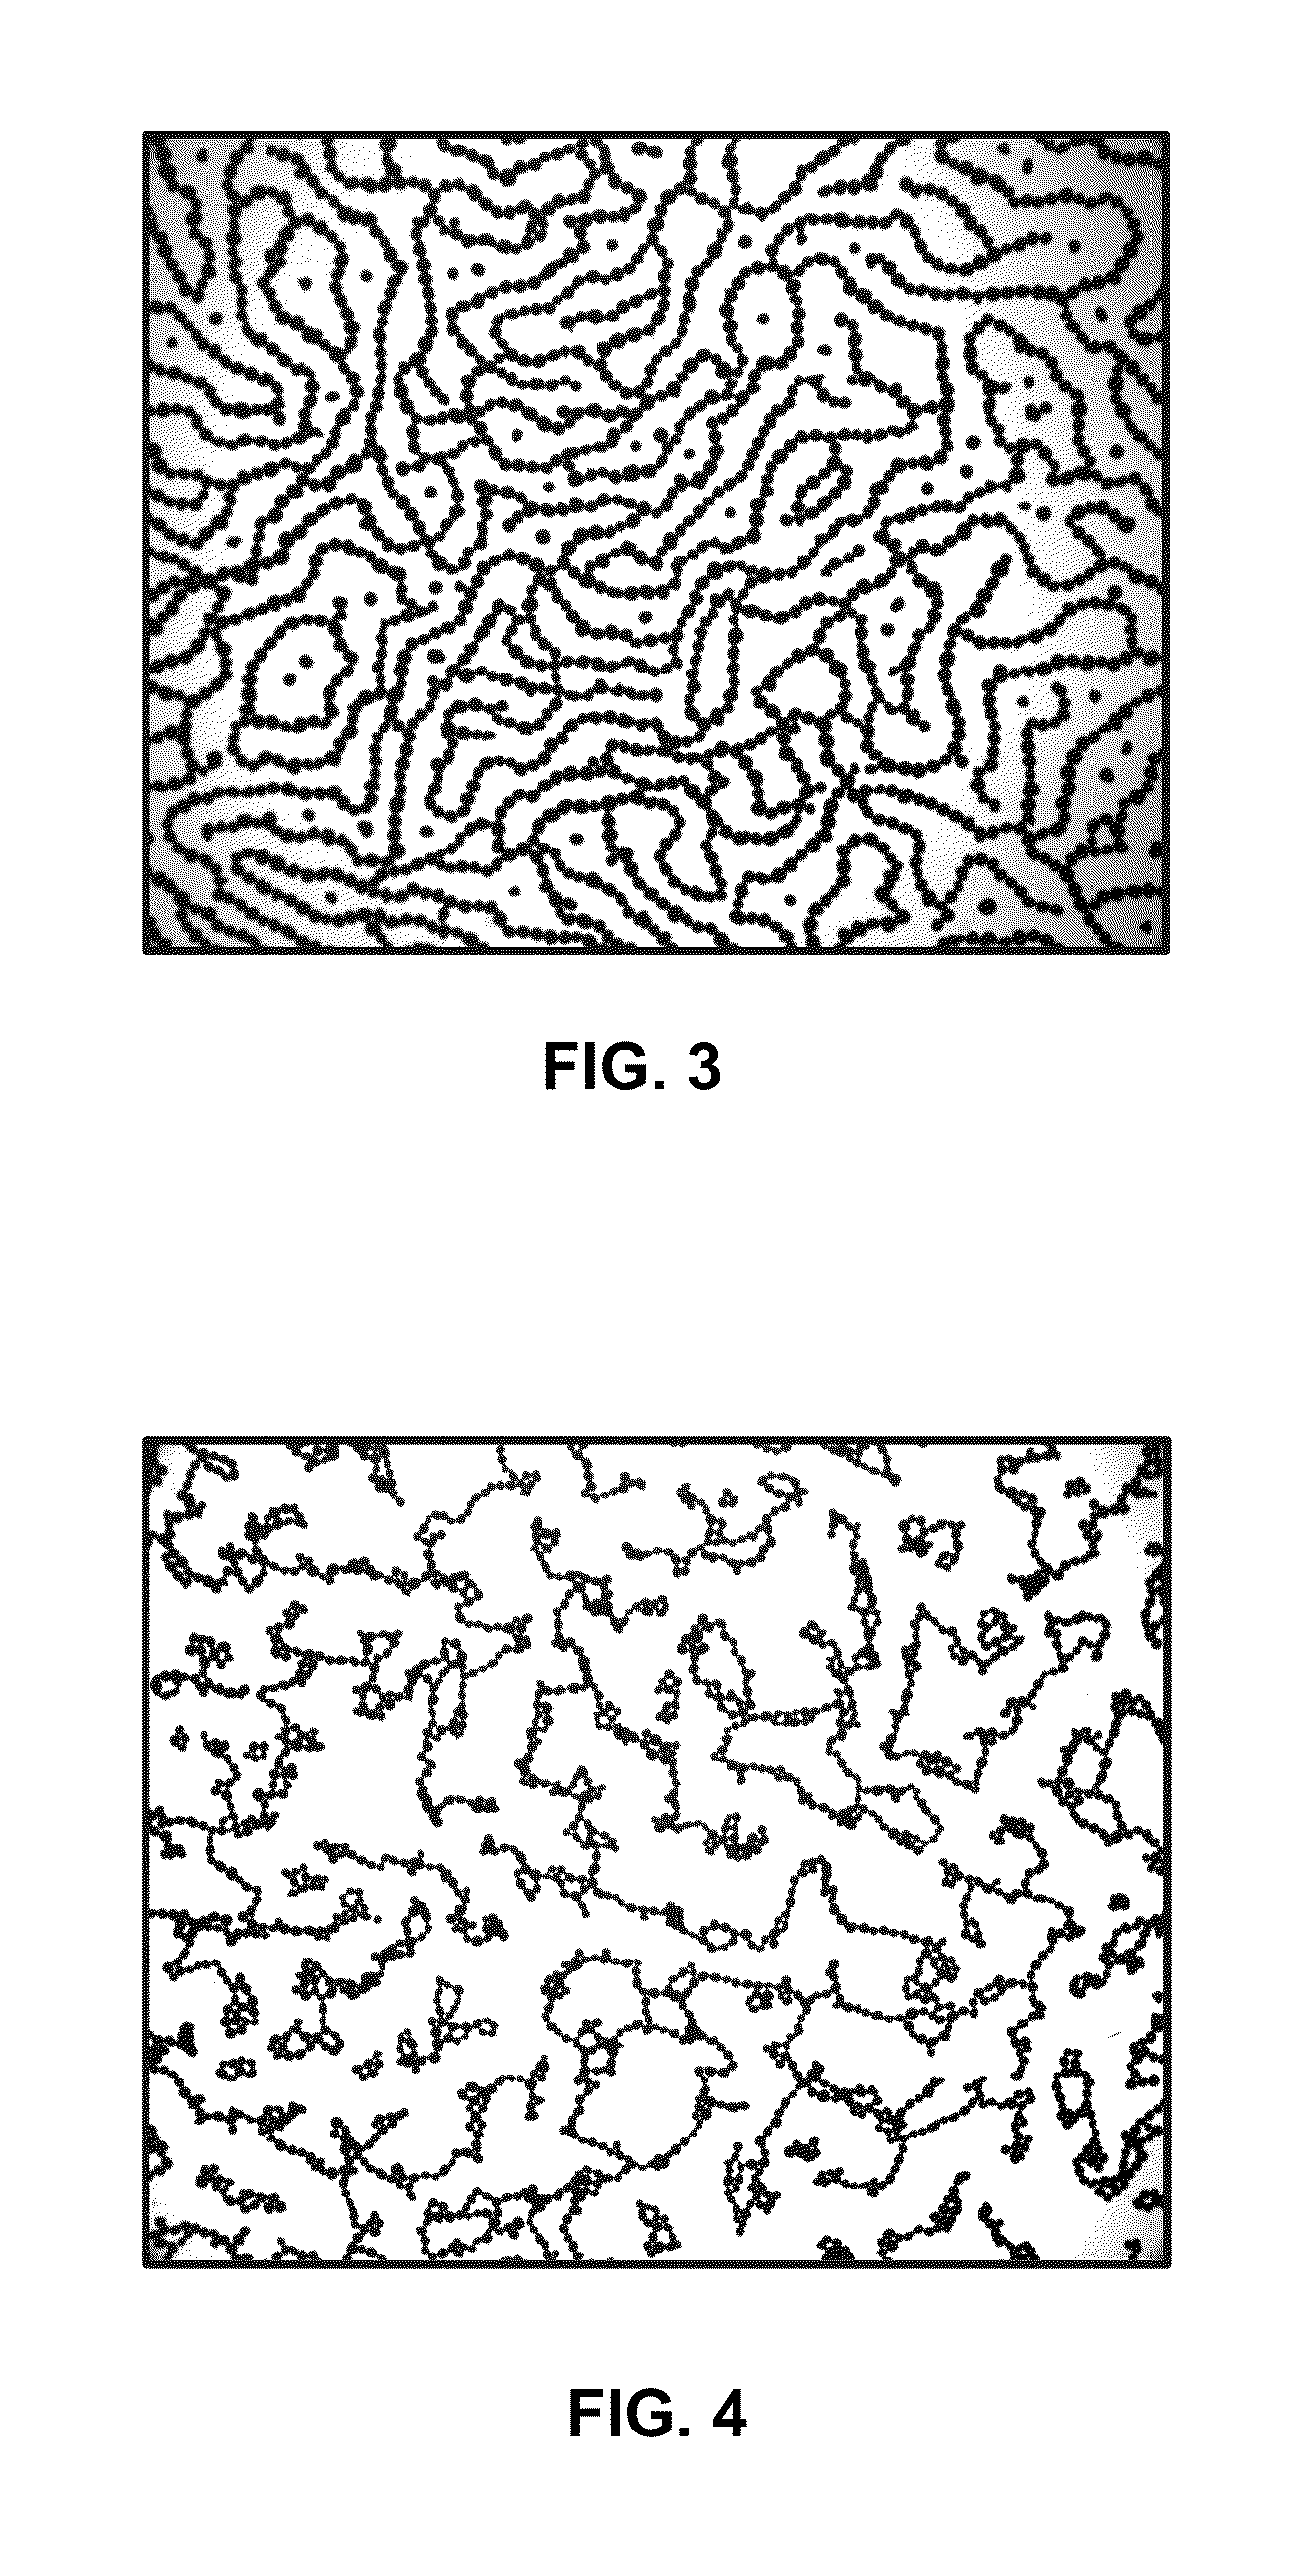 Systems and methods for creation of conducting networks of magnetic particles through dynamic self-assembly process